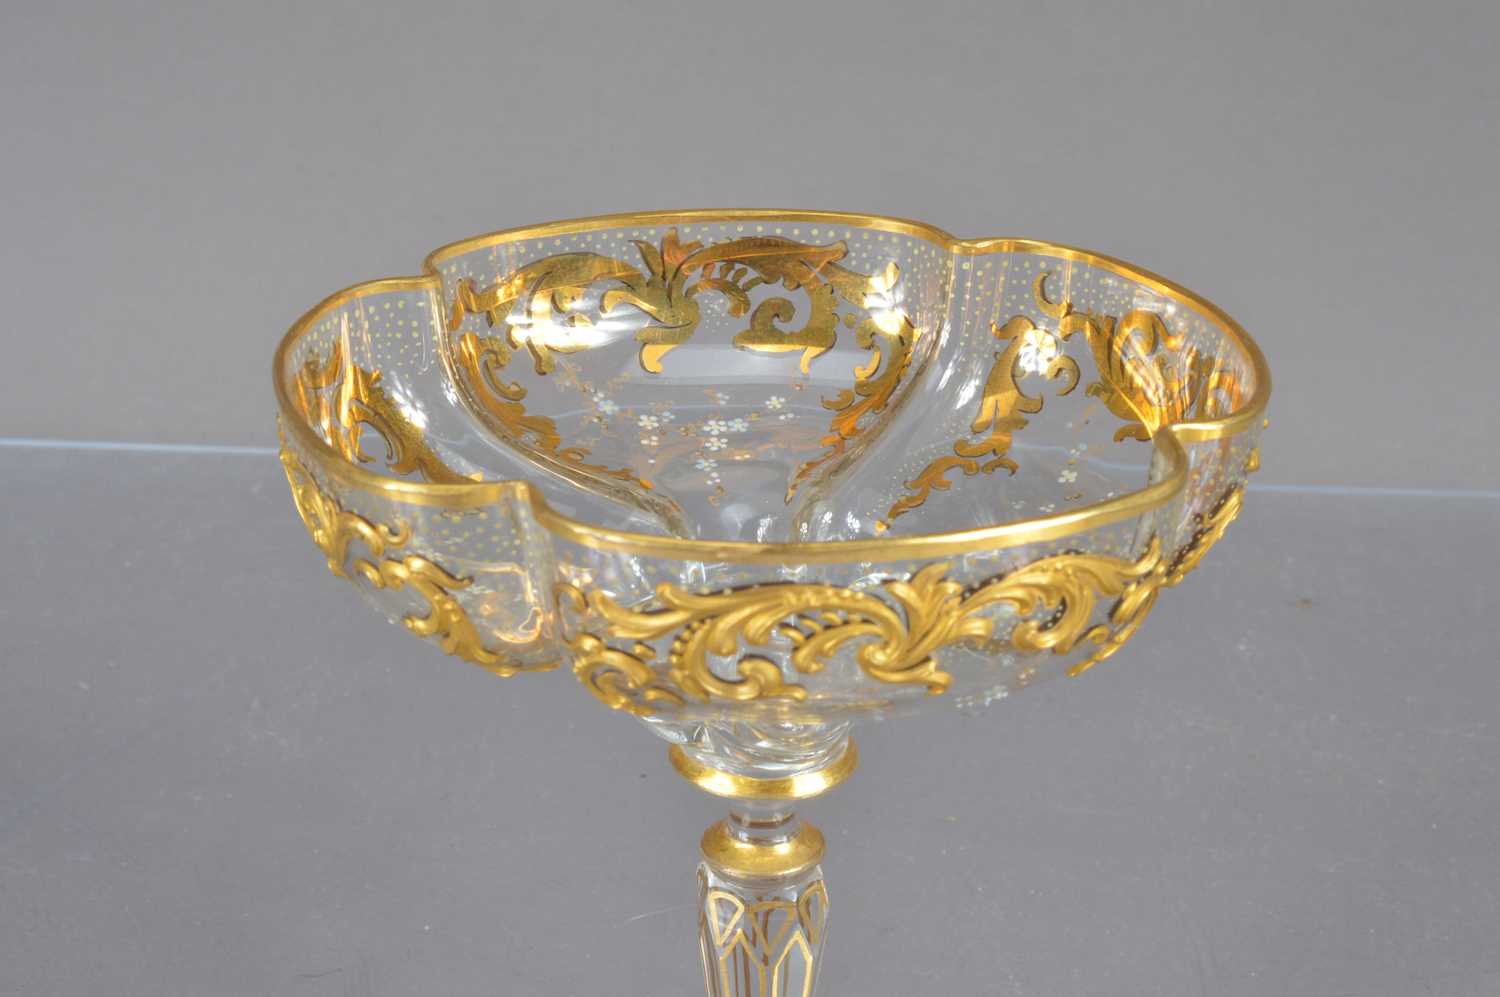 An exceptional Venetian gilt and enamel quatrefoil glass champagne coupe by Salviati, - Image 3 of 3